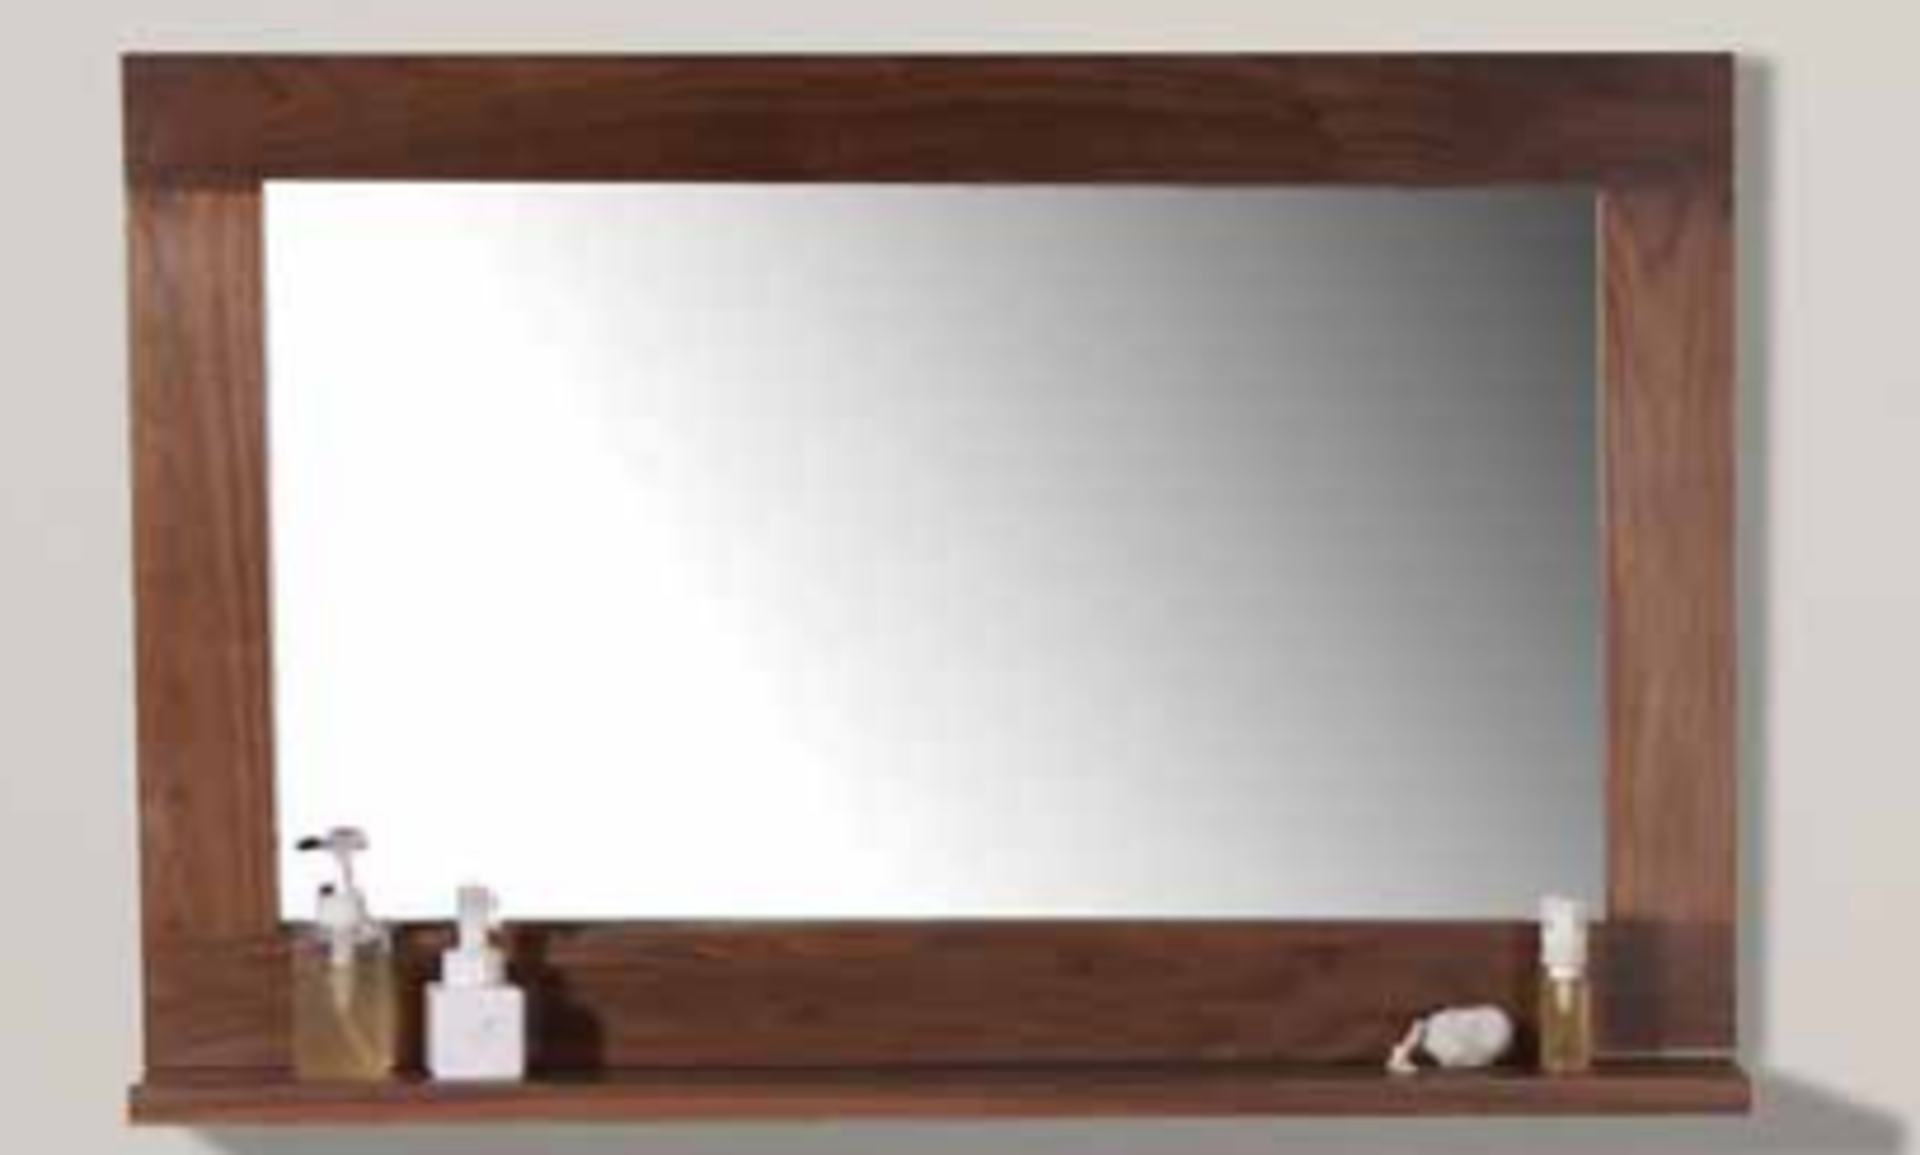 1 x Stonearth Bathroom Wall Mirror With Solid Walnut Frame and Bevelled Glass Mirror - Size: Large - Image 3 of 11